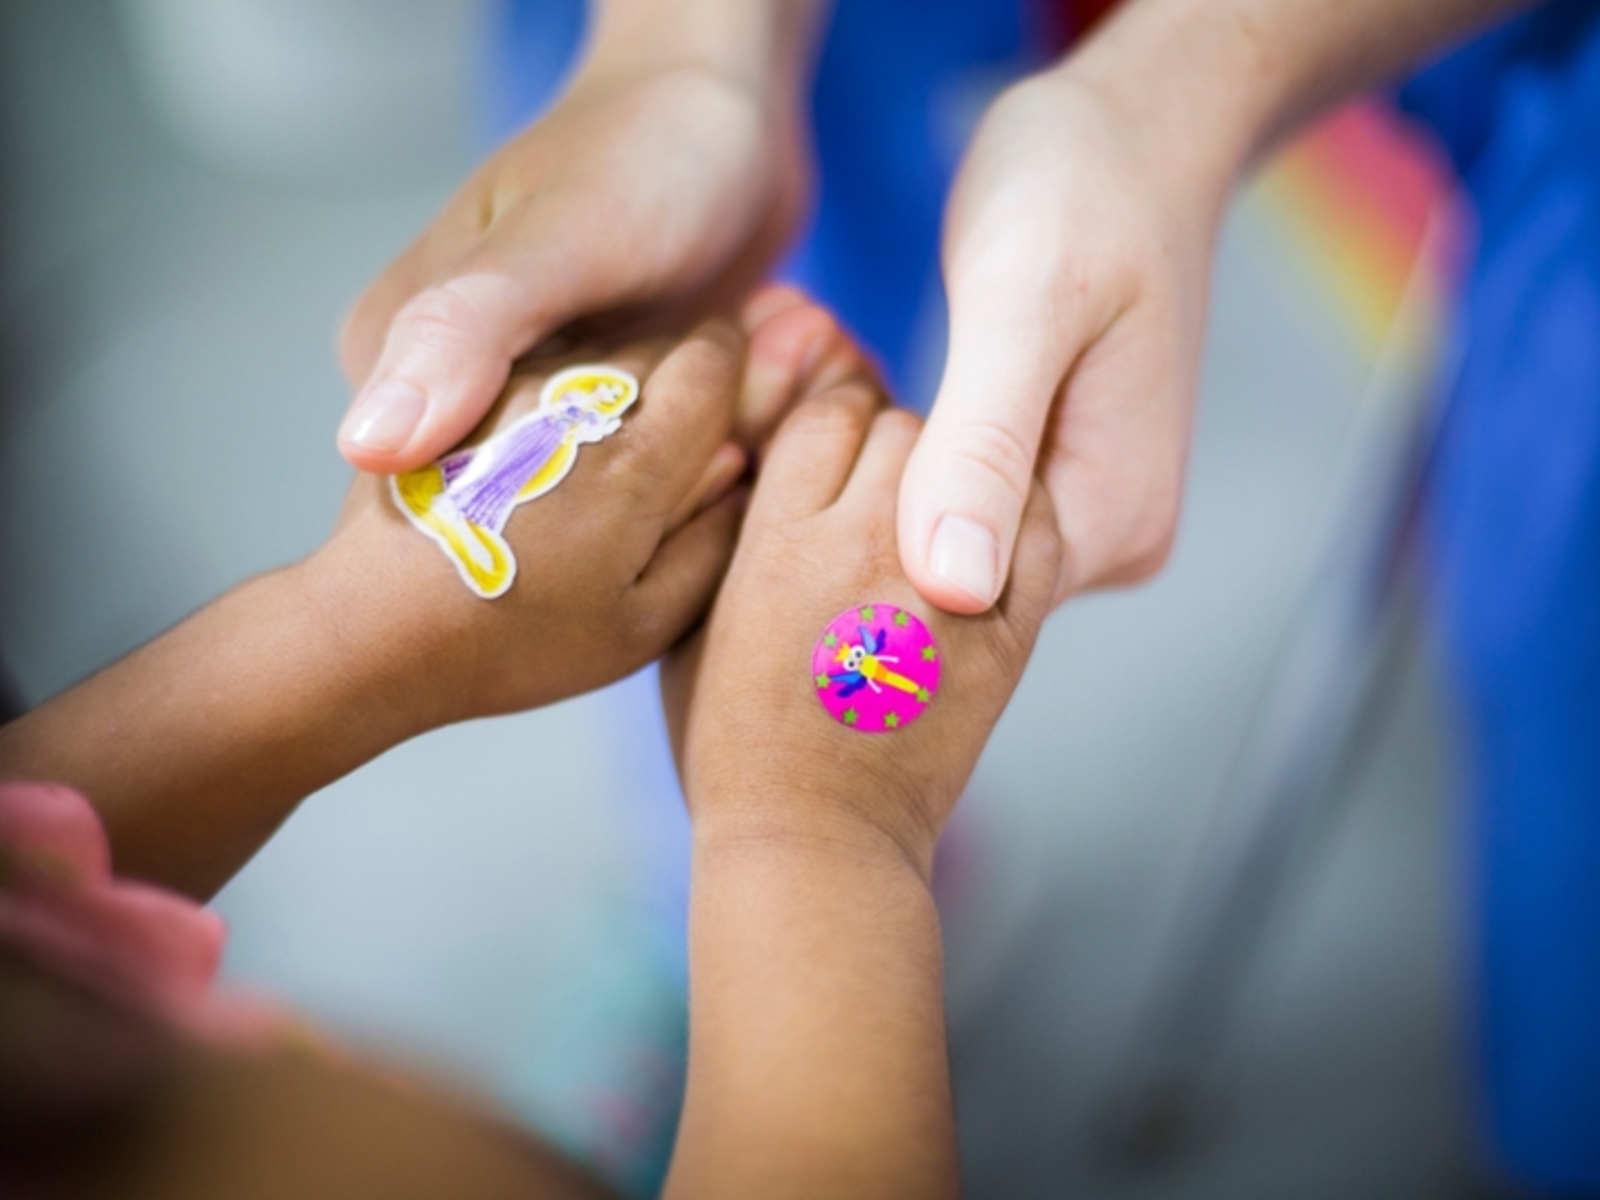 Nursing holding a child's hands with colorful stickers atop the child's hands